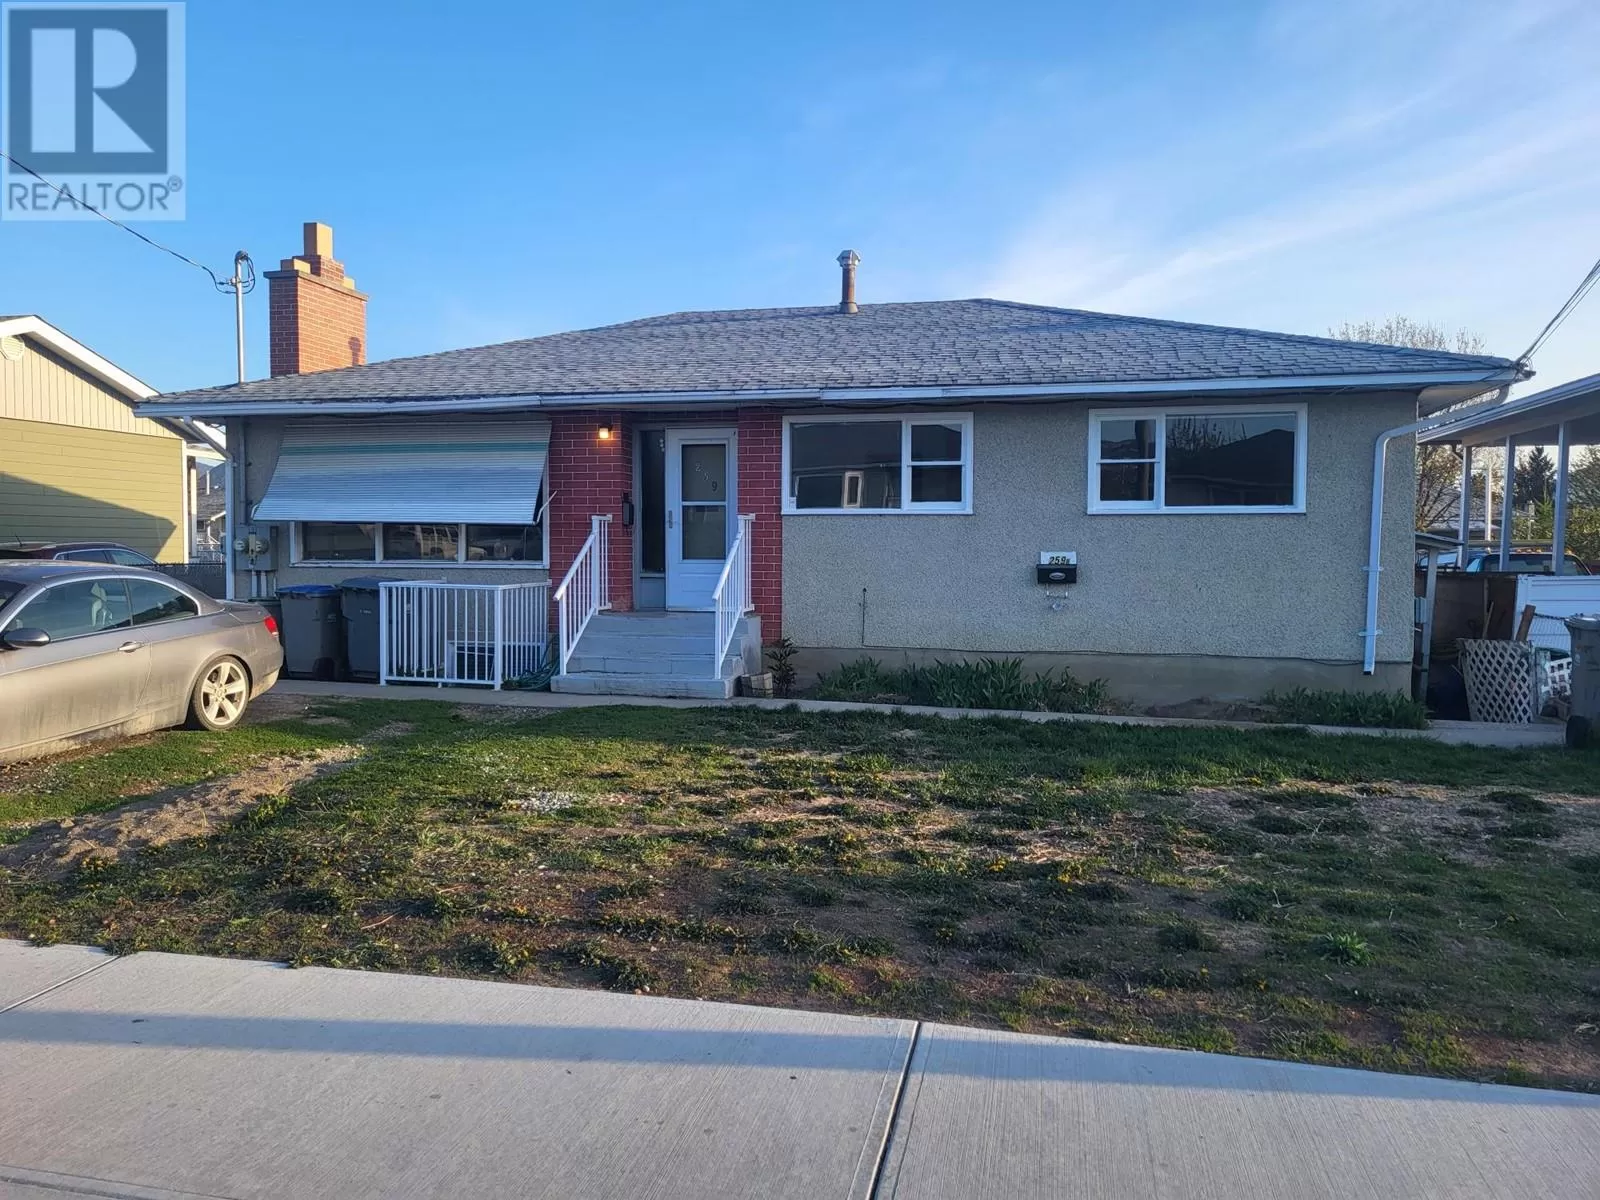 House for rent: 259 Chestnut Ave, Kamloops, British Columbia V2B 1L4